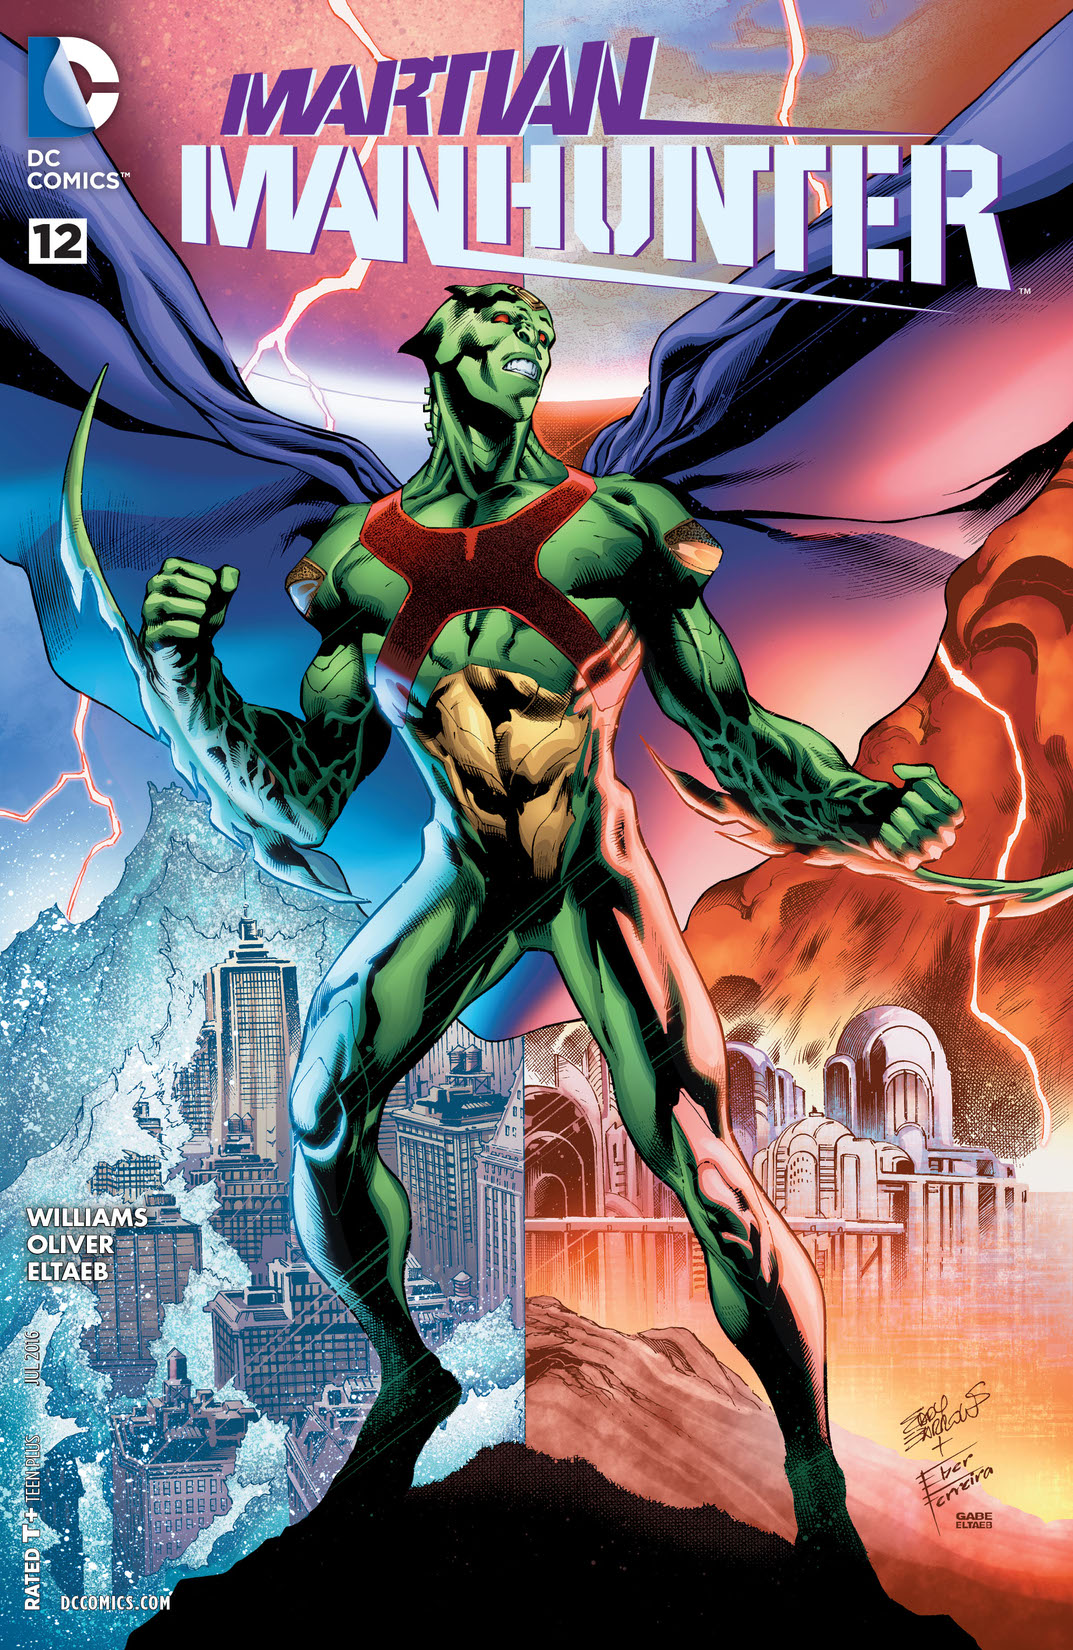 Martian Manhunter (2015-) #12 preview images